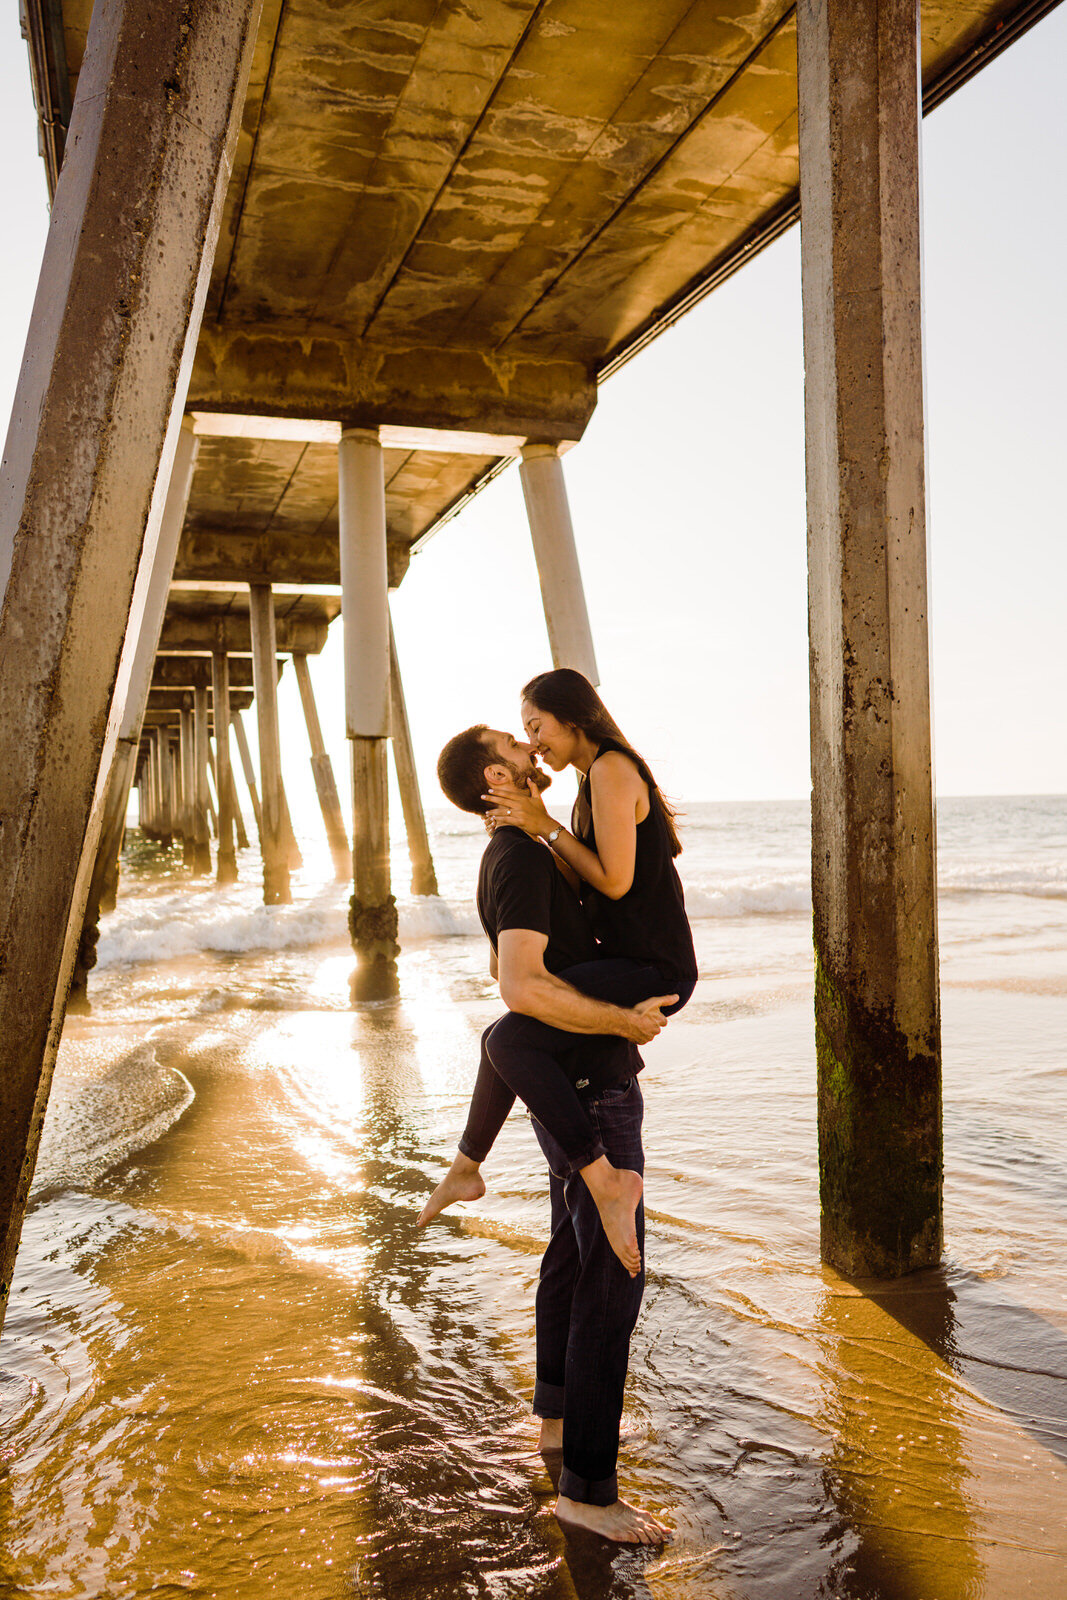 Man romantically picks up fiancee and kisses her at Hermosa beach Pier